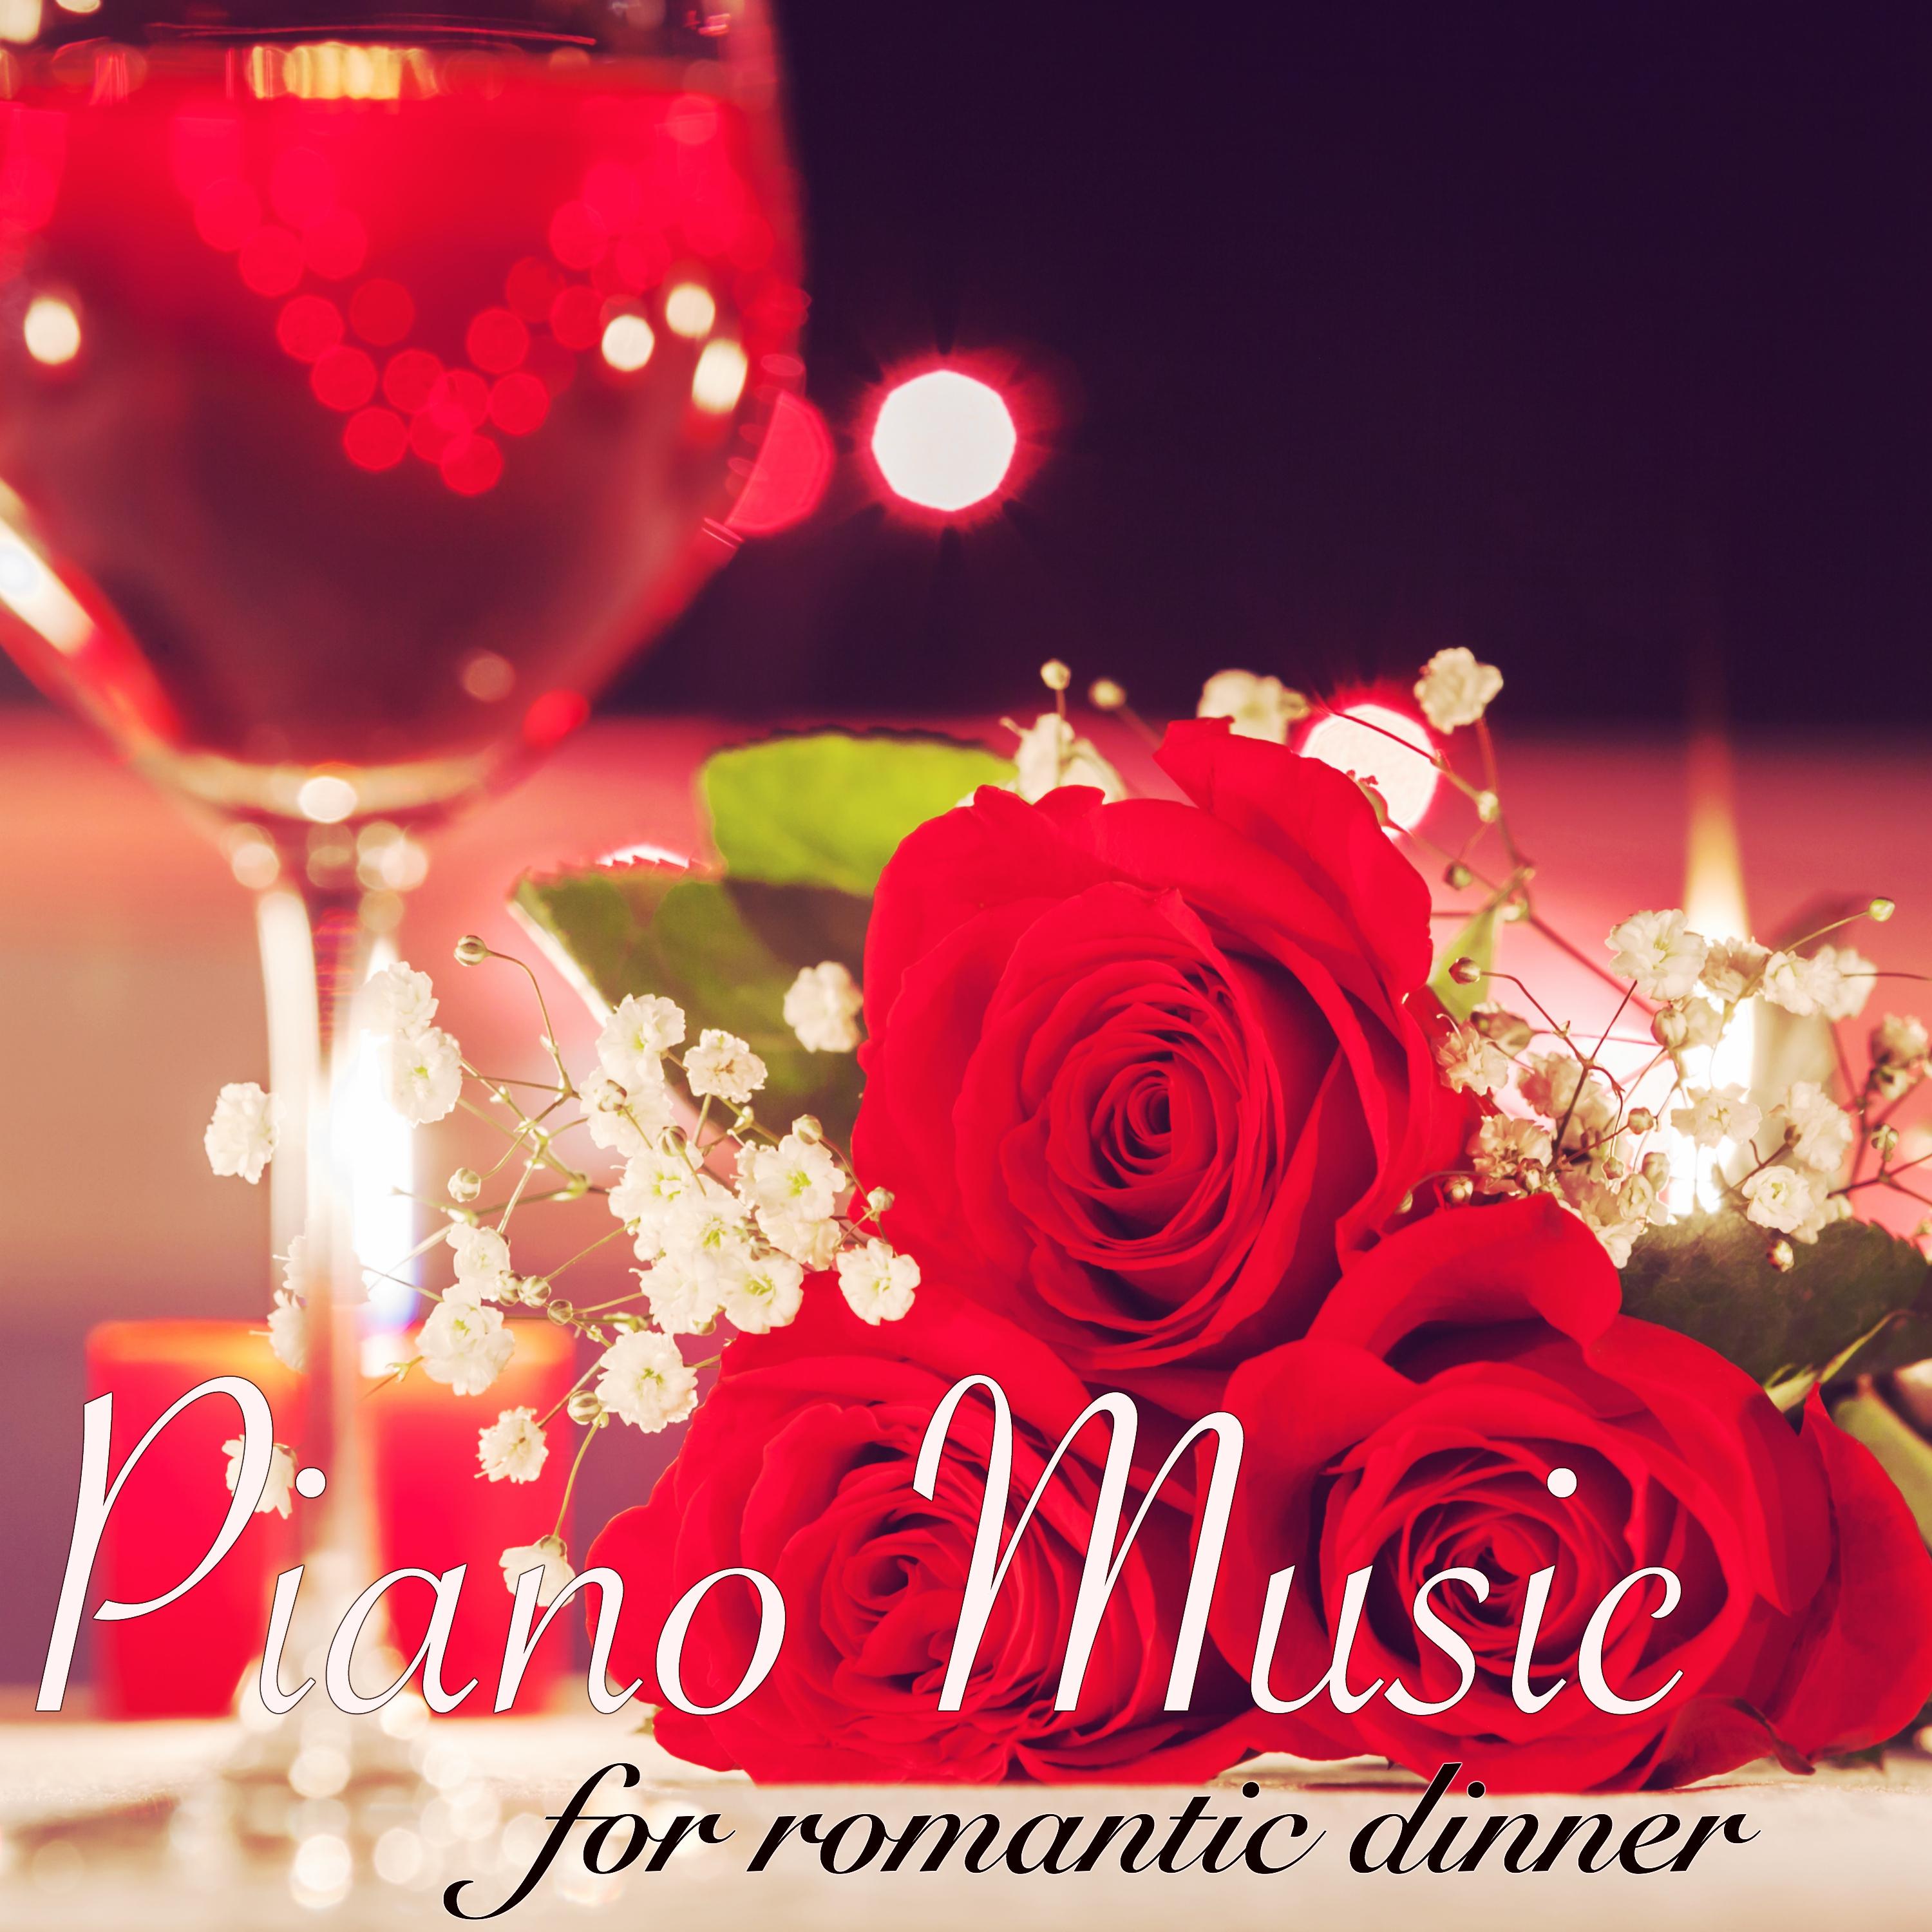 Piano Music for Romantic Dinner – Restaurant Dinner Music or Perfect Background Piano Songs for Romantic and Elegant Dinner at Home